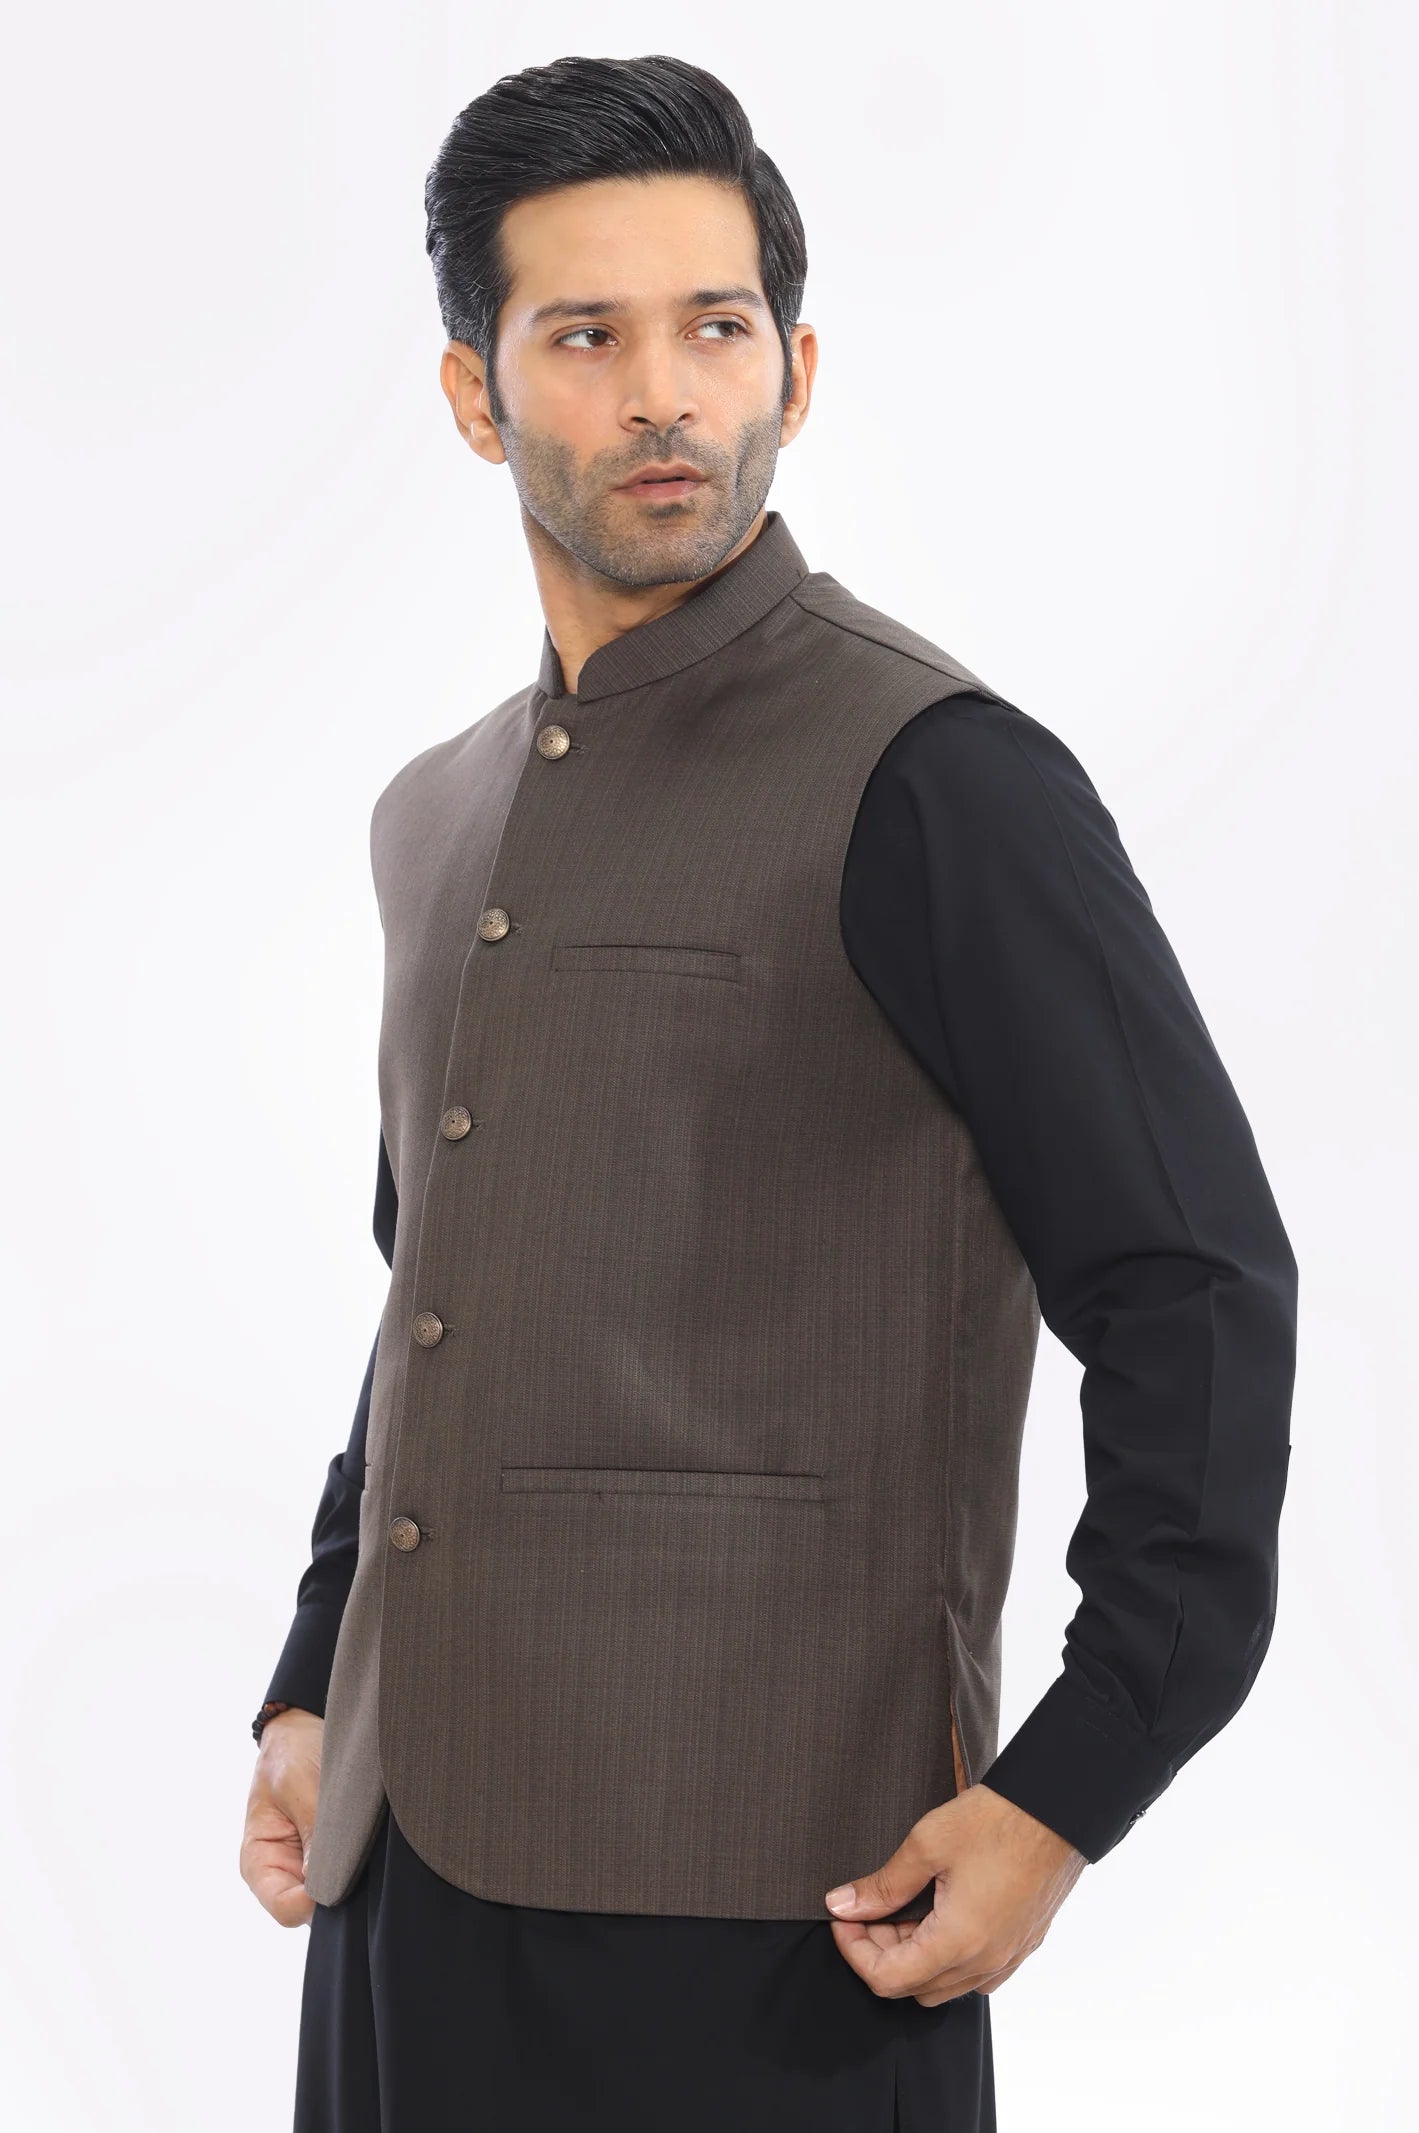 Brown Waistcoat From Diners